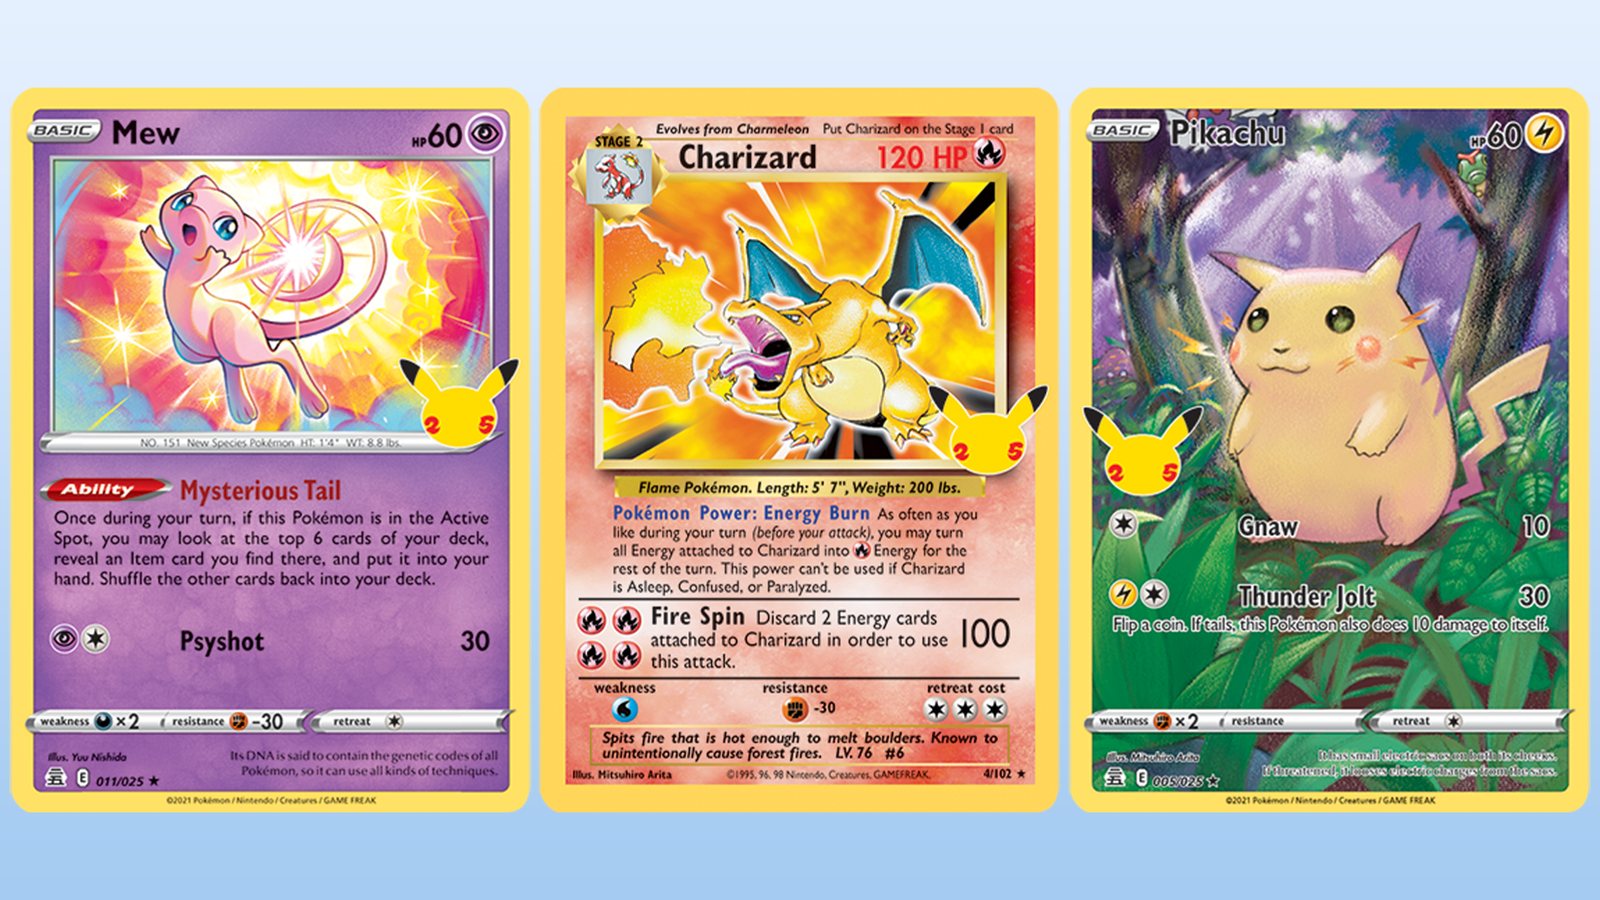 Pokémon TCG Celebrations is out today, featuring remakes of 25 classic  cards - including Base Set Charizard